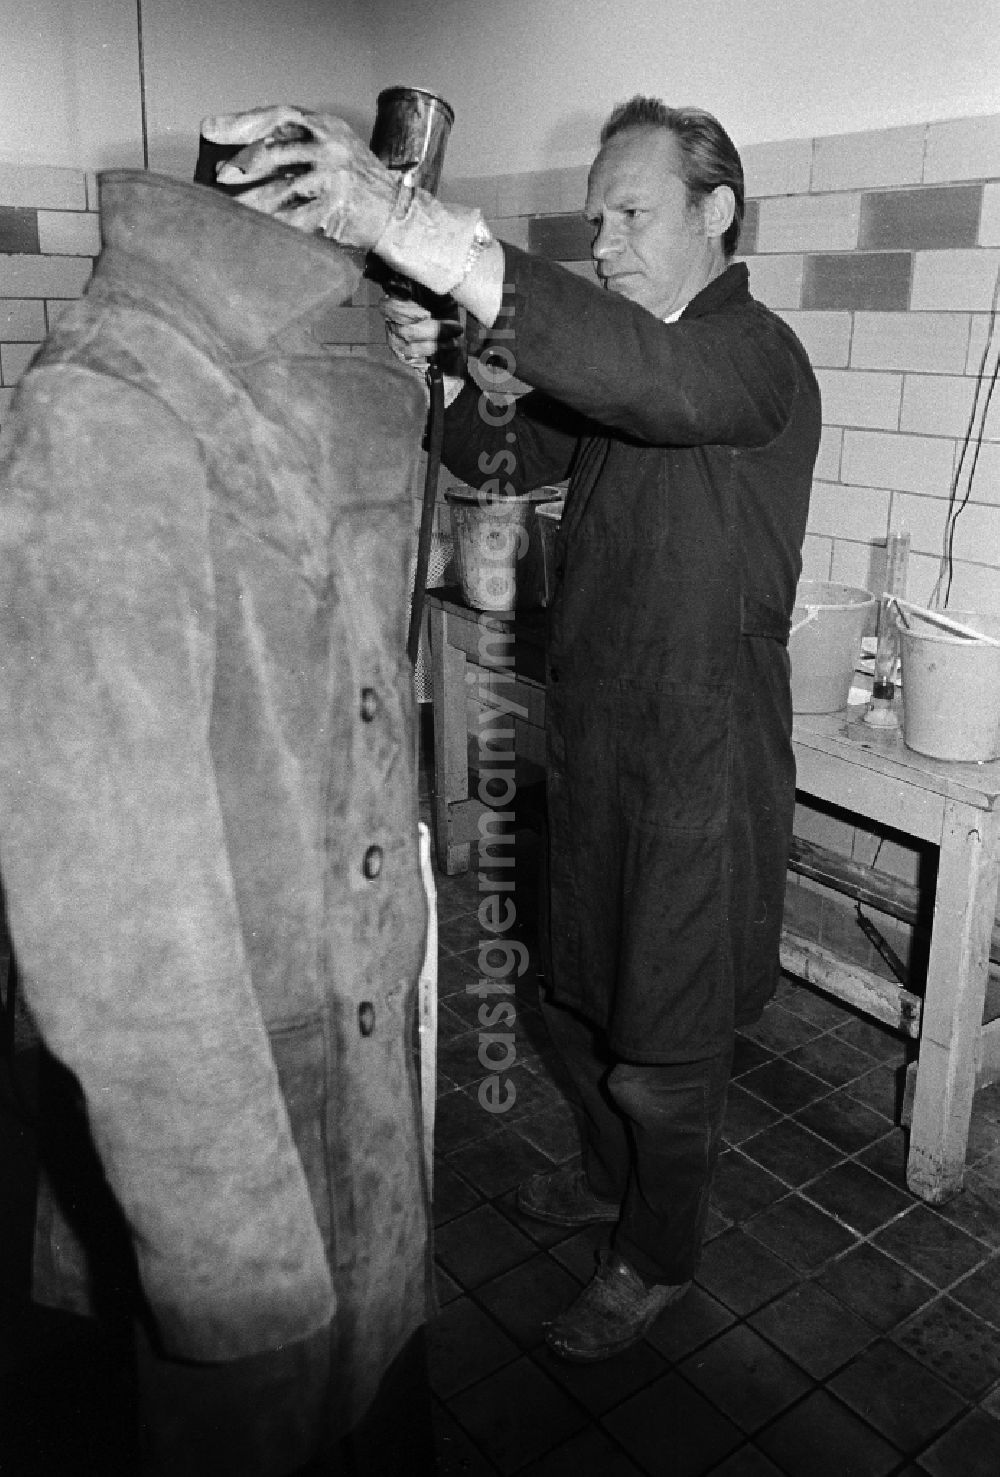 GDR photo archive: Berlin - A worker in the VEB united laundrys Berlin Rewatex with clean of a coat in Berlin, the former capital of the GDR, German democratic republic